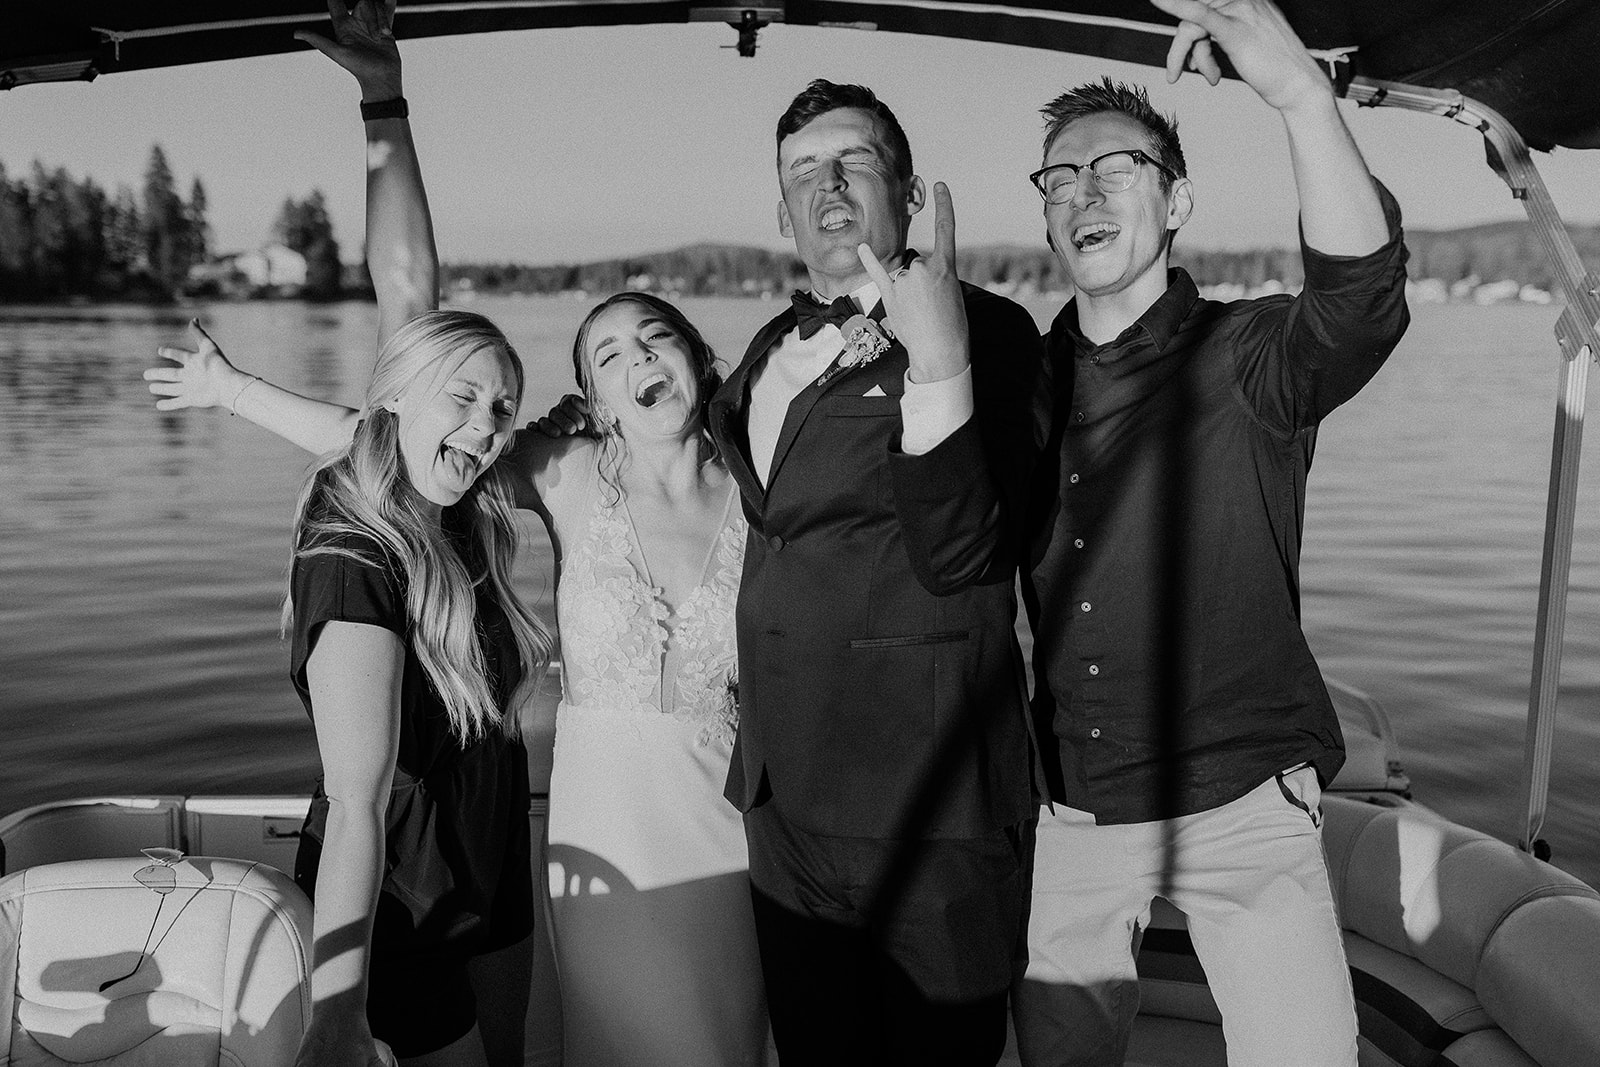 Photographer, videographer, bride and groom snap a photo together on pontoon boat at private lake house wedding. 